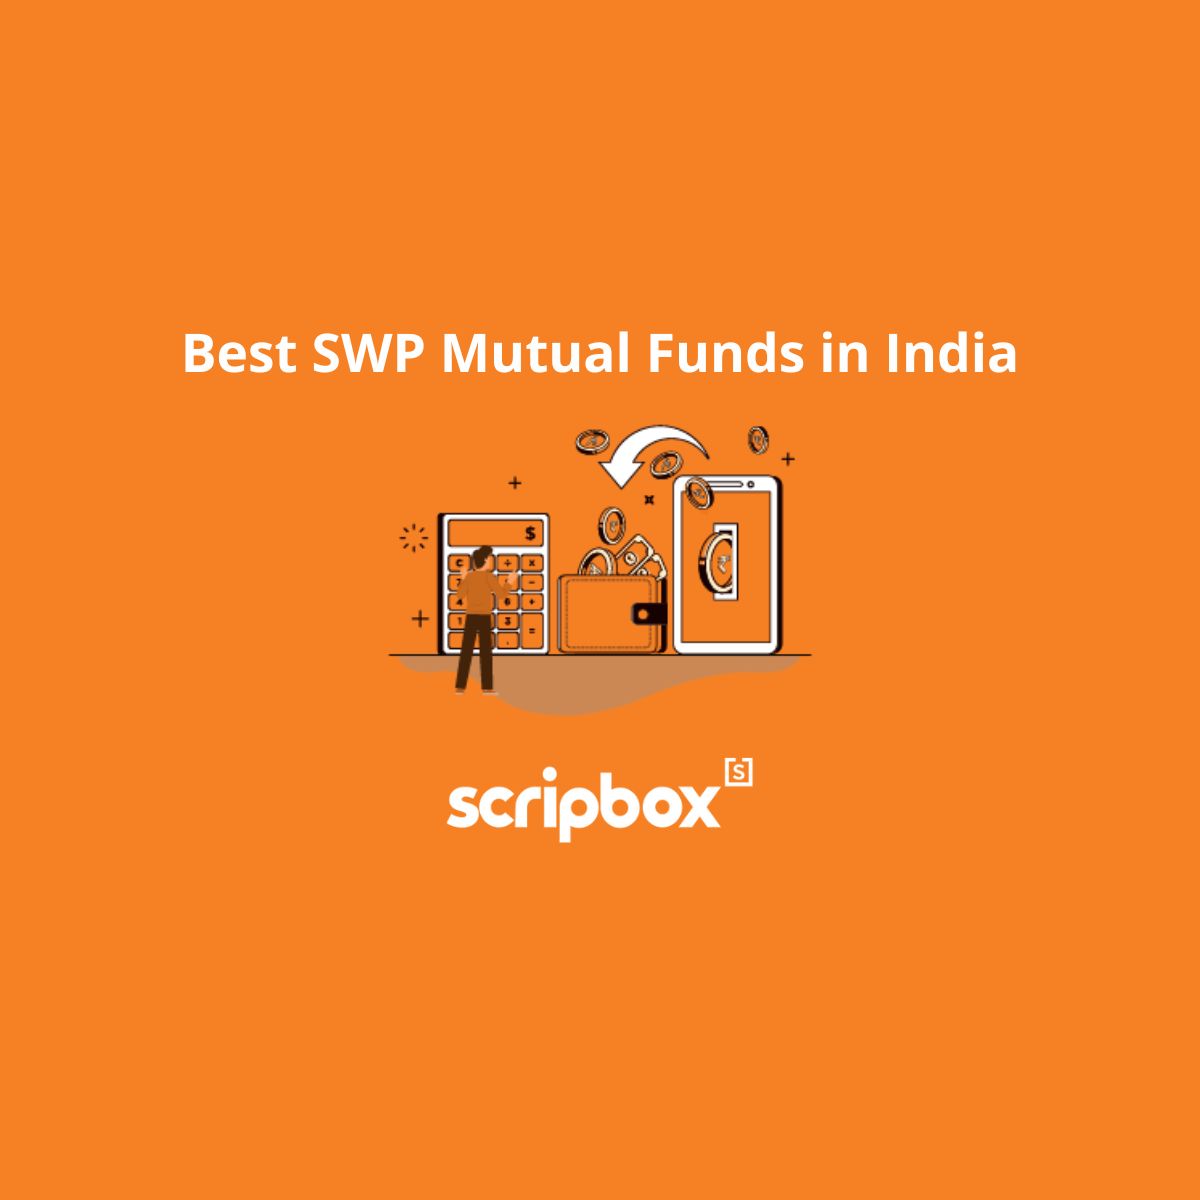 Best SWP Mutual Funds in India